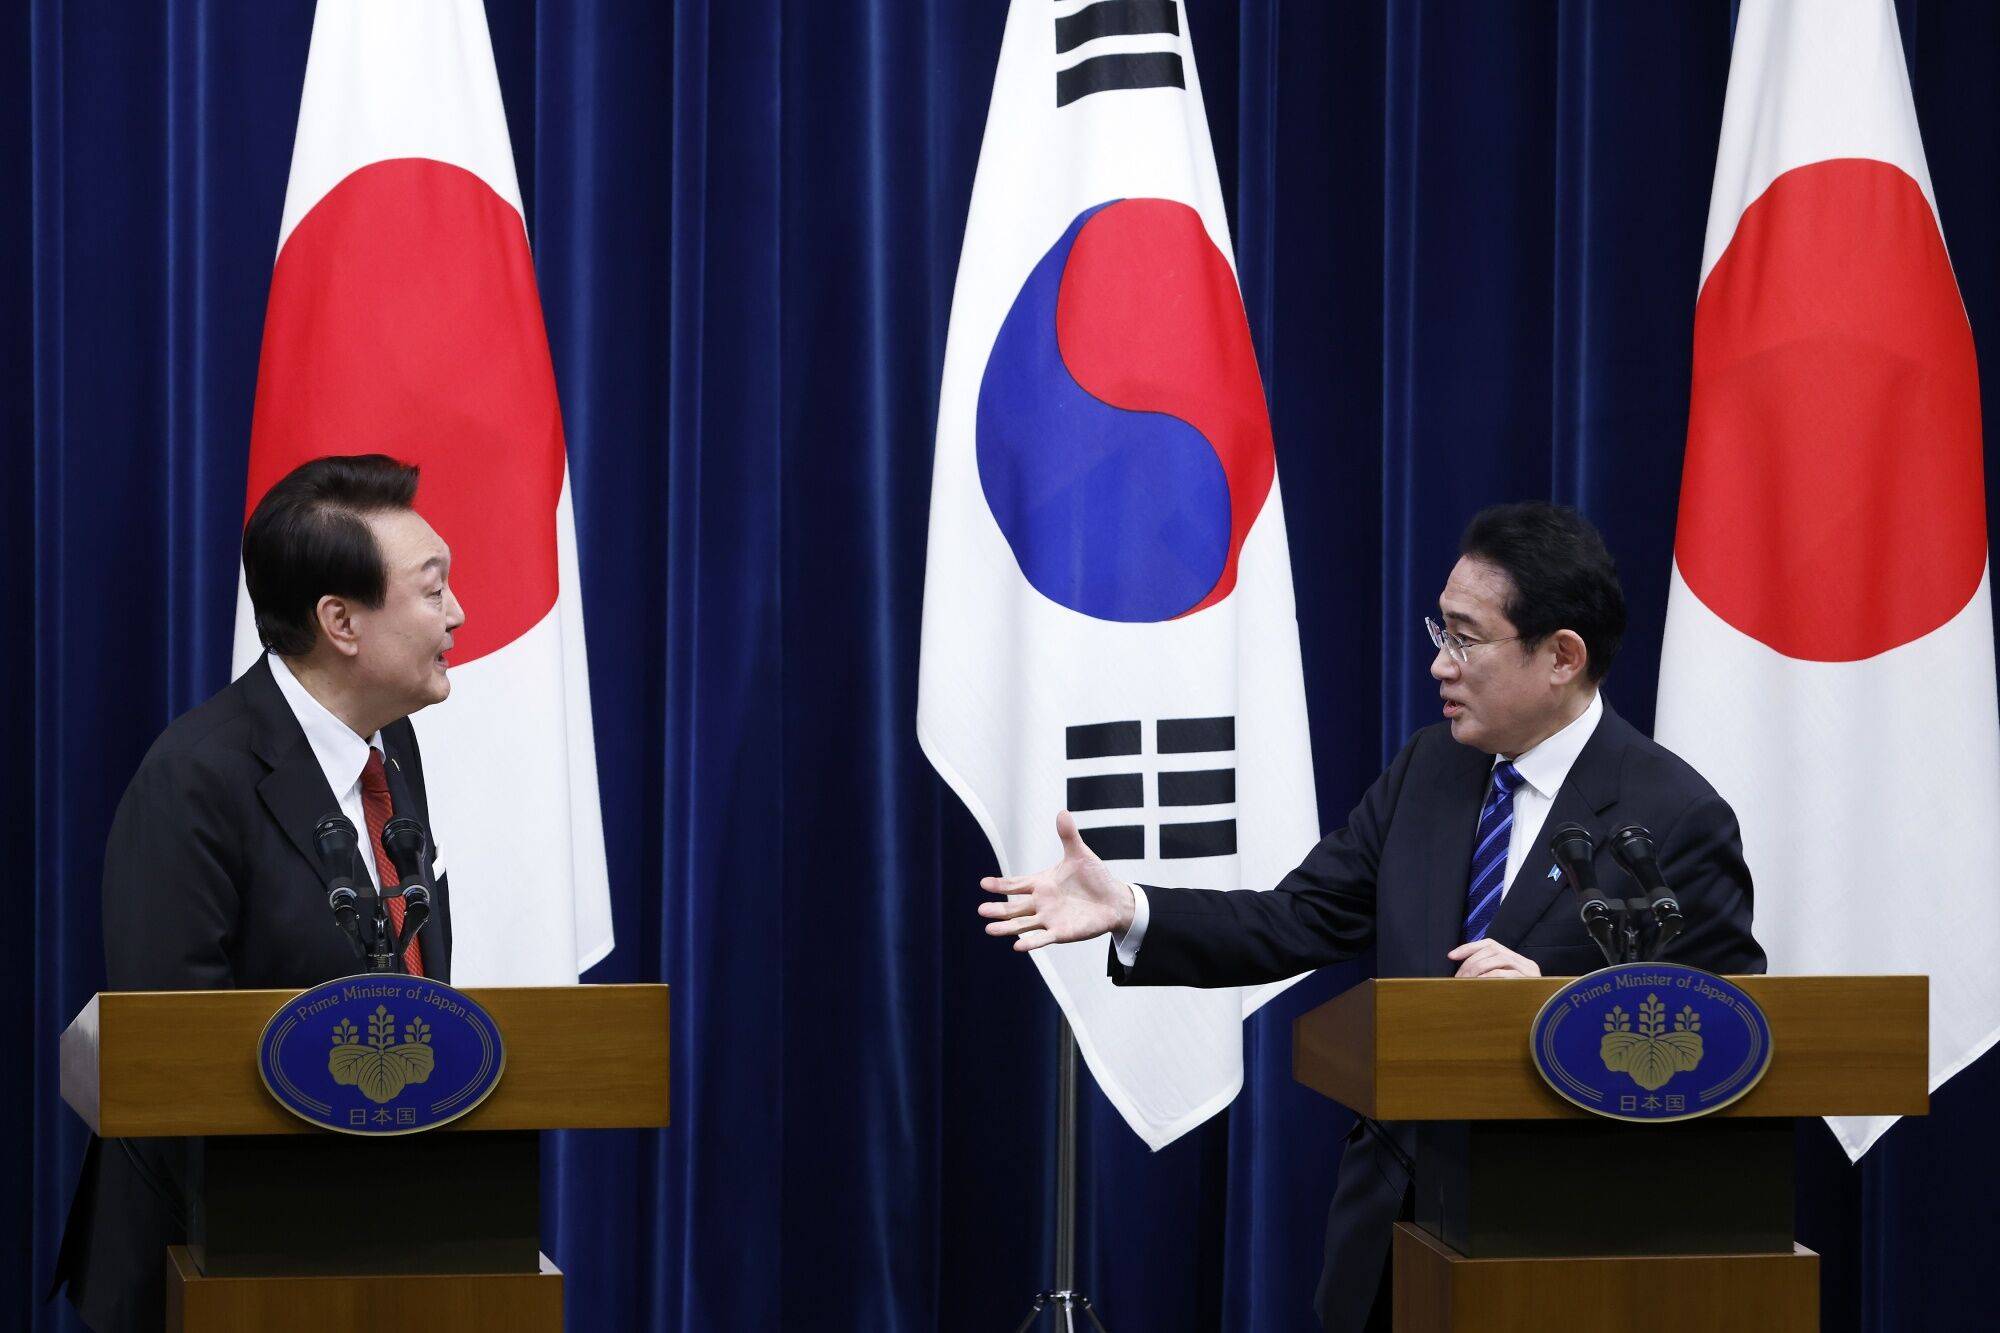 Prime Minster Fumio Kishida and South Korean President Yoon Suk-yeol give a joint news conference during summit talks in Tokyo on Thursday.  | BLOOMBERG